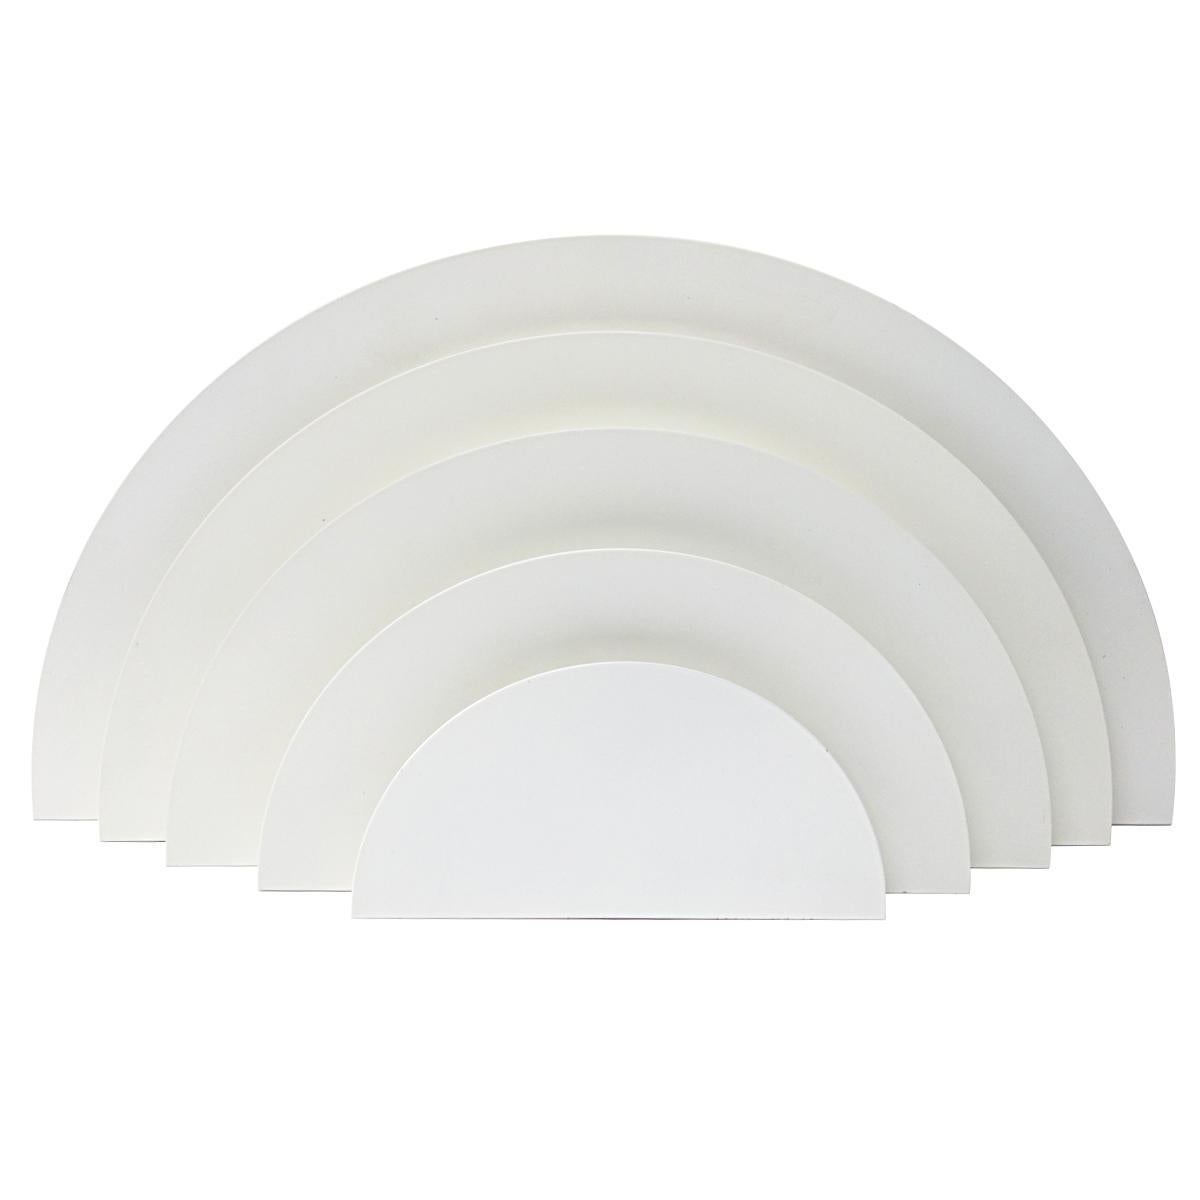 The Meander sconce was designed by Cesare Casati and Emanuele Ponzi for the leading Dutch light manufacturer of the 1960s and 1970s.
They are made of white lacquered metal and each sconce contains six semi circles that beautifully distribute the